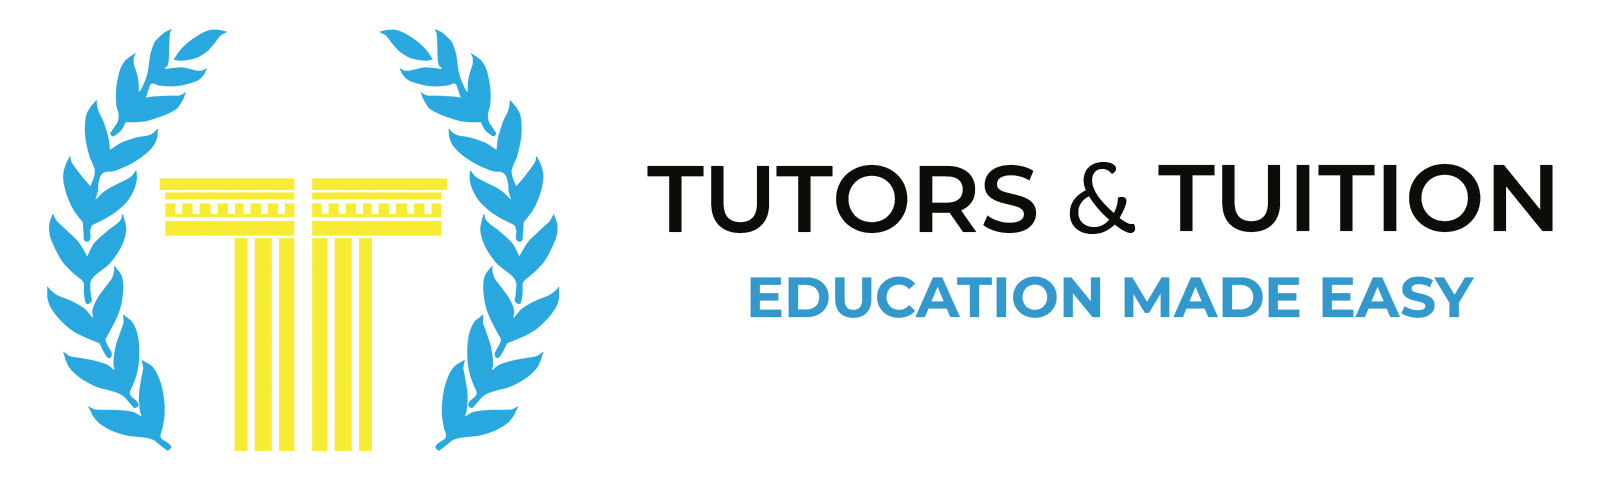 Tutors and Tuition